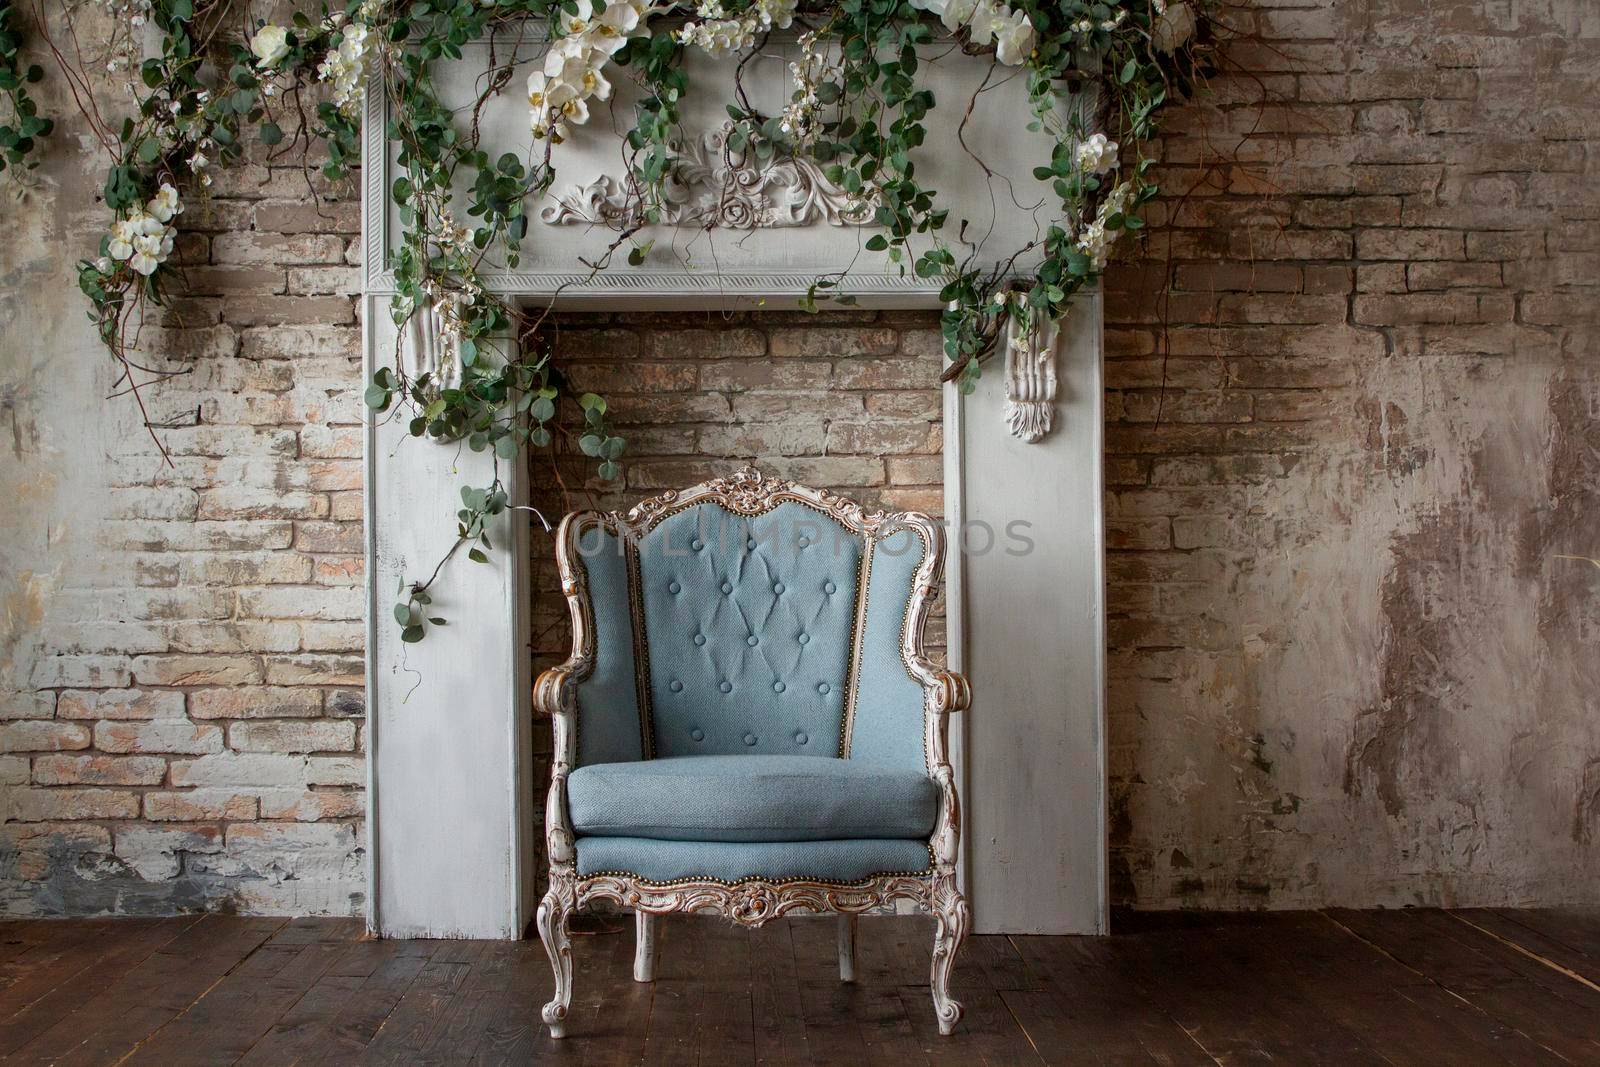 Old antique armchair furniture against a light gray grunge wall, stucco, and vines with flowers Abstract empty room by Hitachin